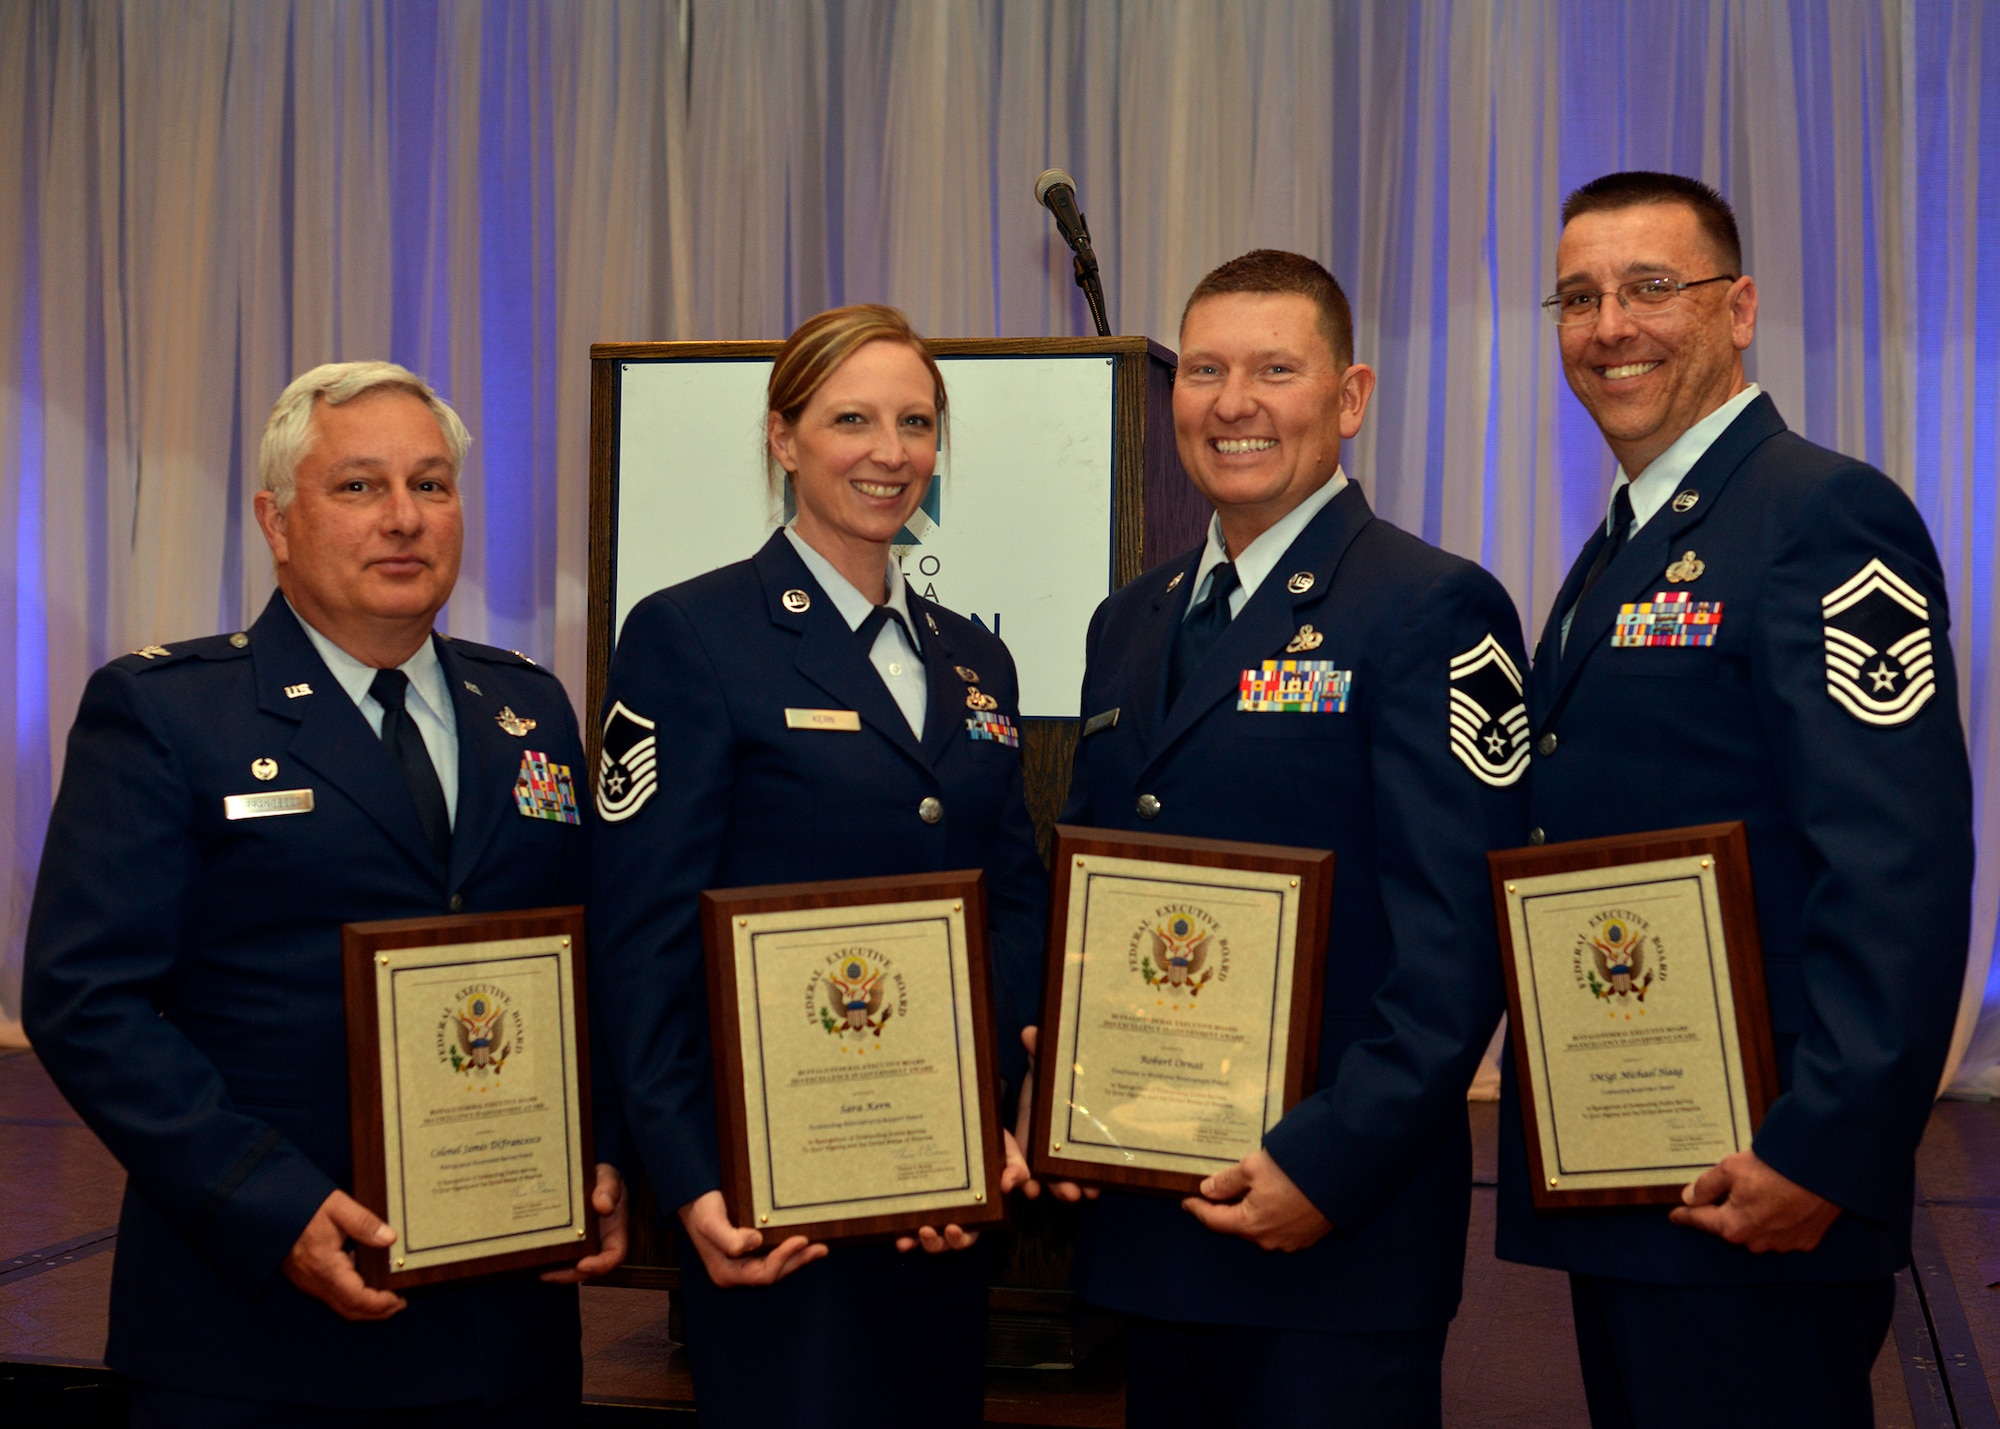 914th Airlift Wing members, Col. James DiFrancesco, Master Sgt. Sara Kern, Senior Master Sgt. Robert Ornat, and Senior Master Sgt. Michael Haag pose with awards they received from the Buffalo Federal Executive Board, during a ceremony held at the Buffalo Convention Center, May 6, 2014, Buffalo, N.Y. The Buffalo Federal Executive Board annually recognizes federal employees who exemplify “excellence in public service.” (U.S. Air Force photo by Tech. Sgt. Joseph McKee)